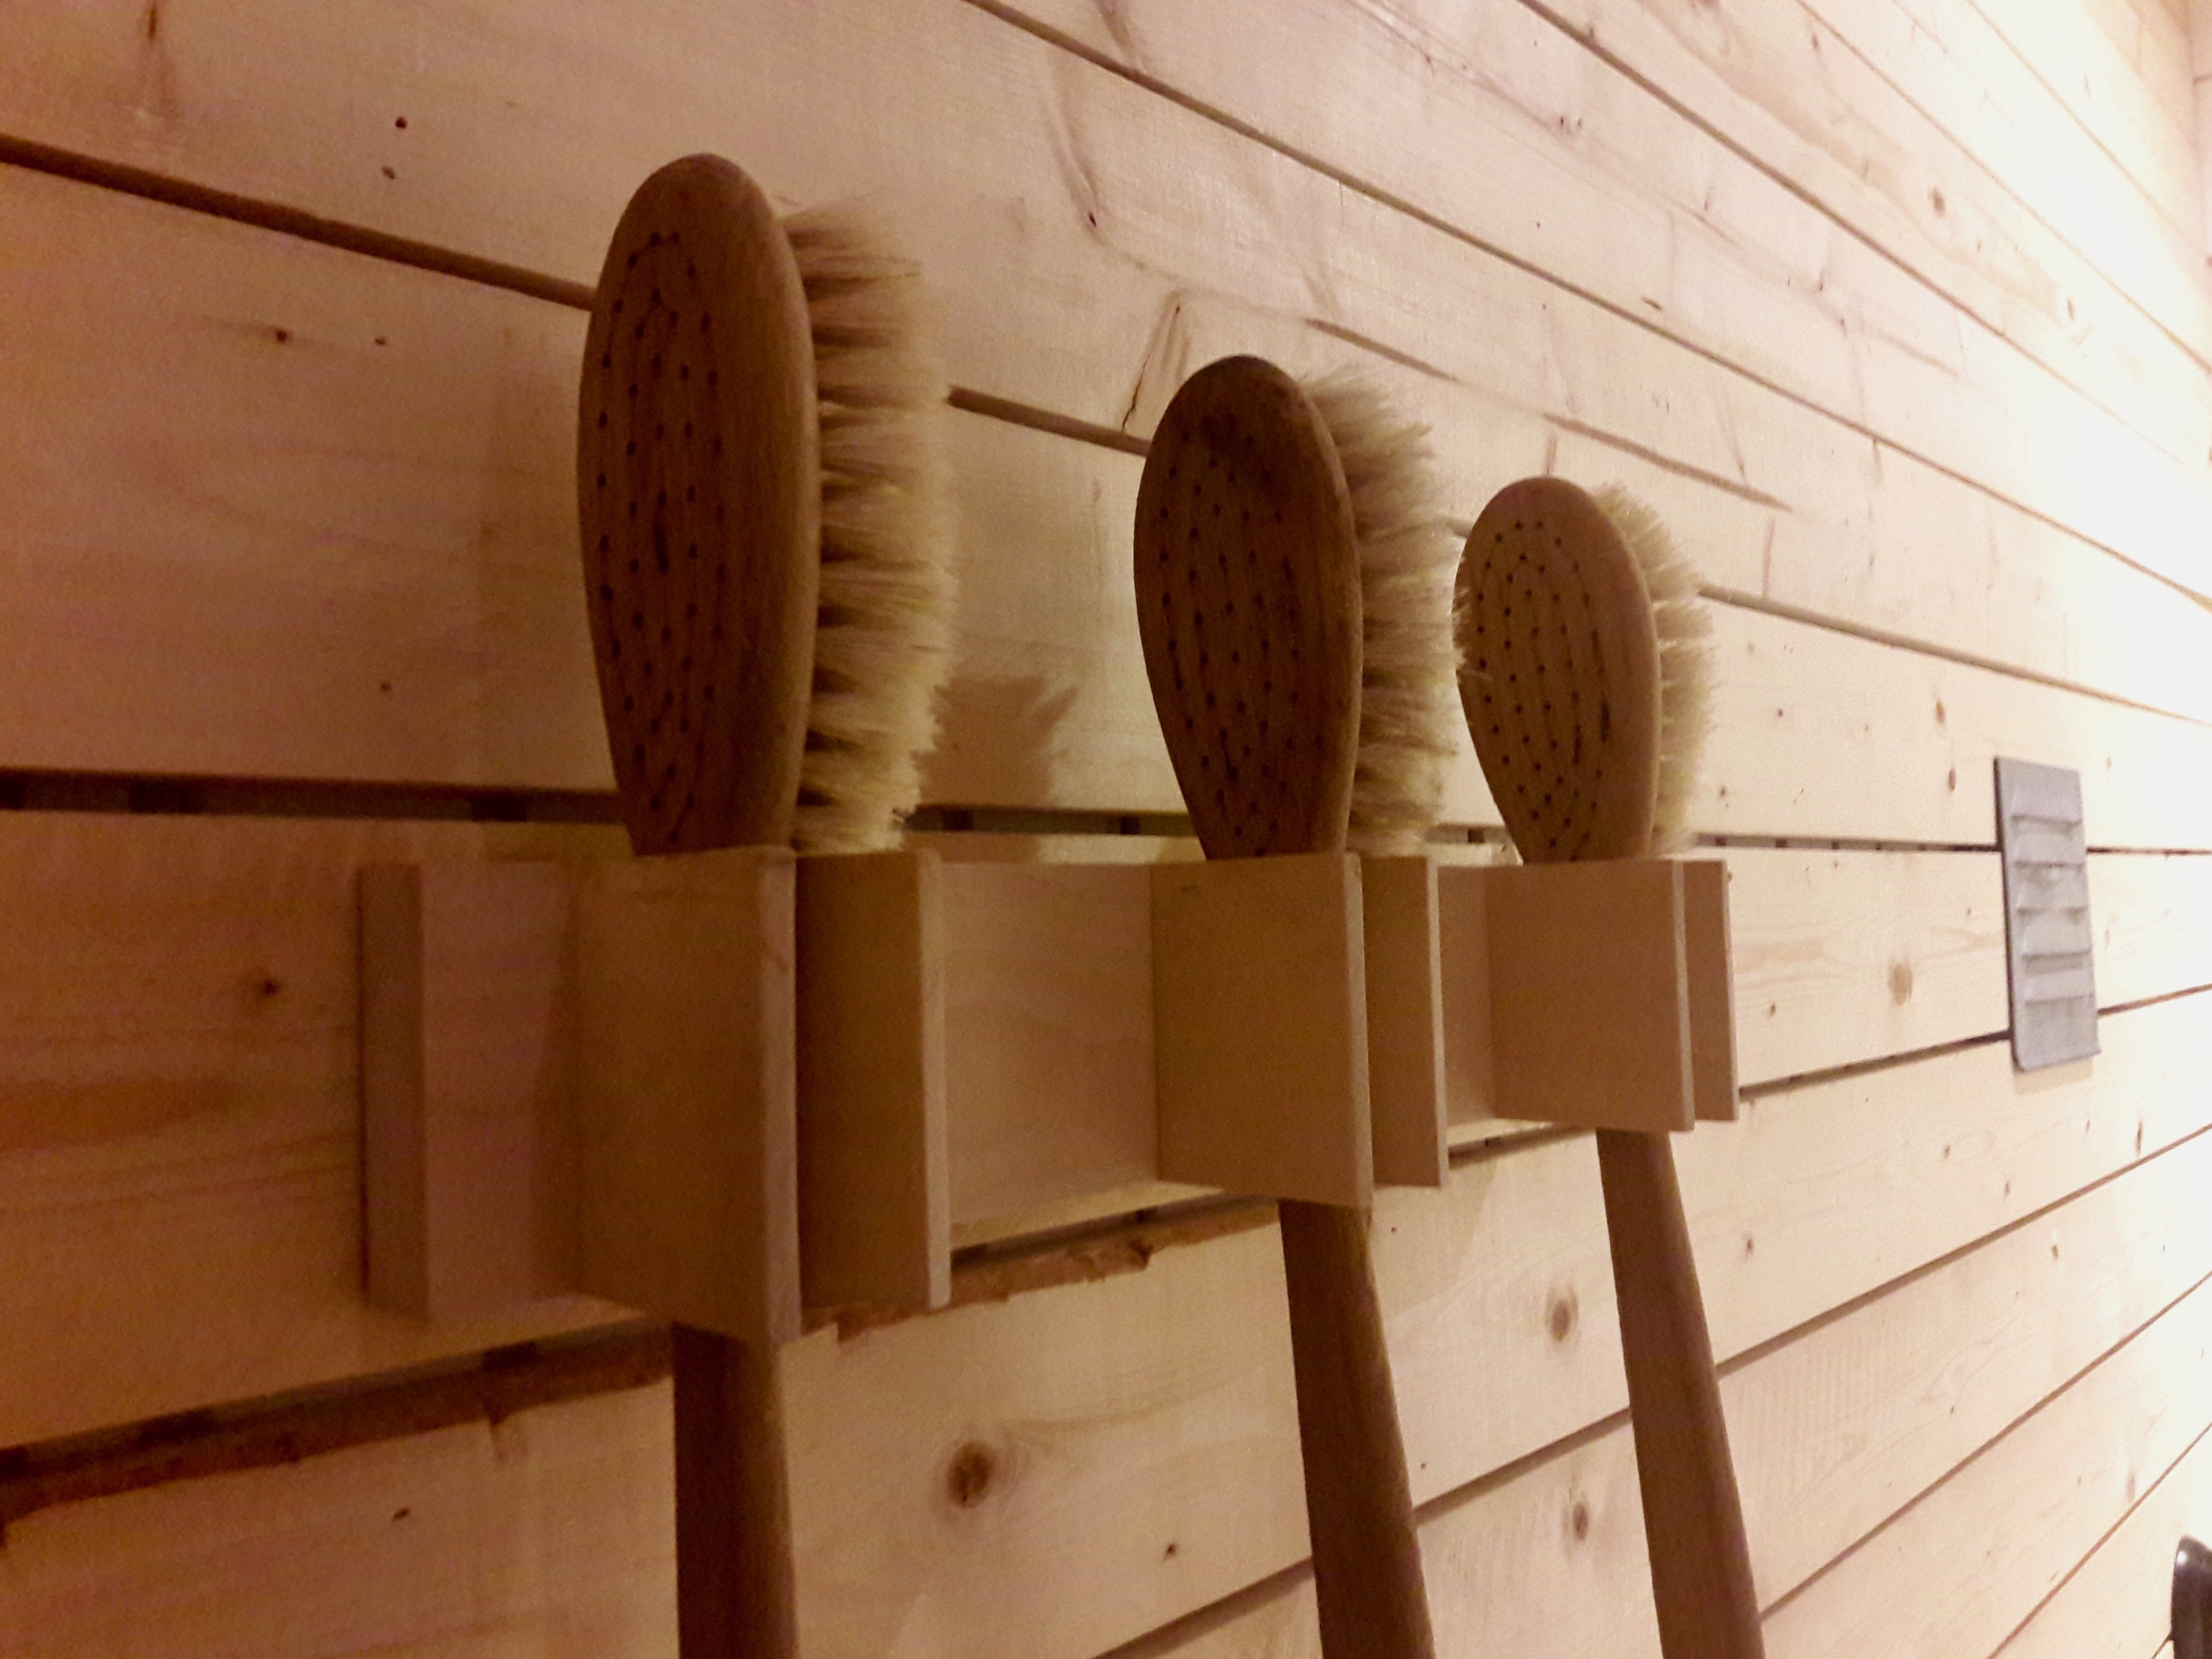 dry brushes at city backpackers hostel